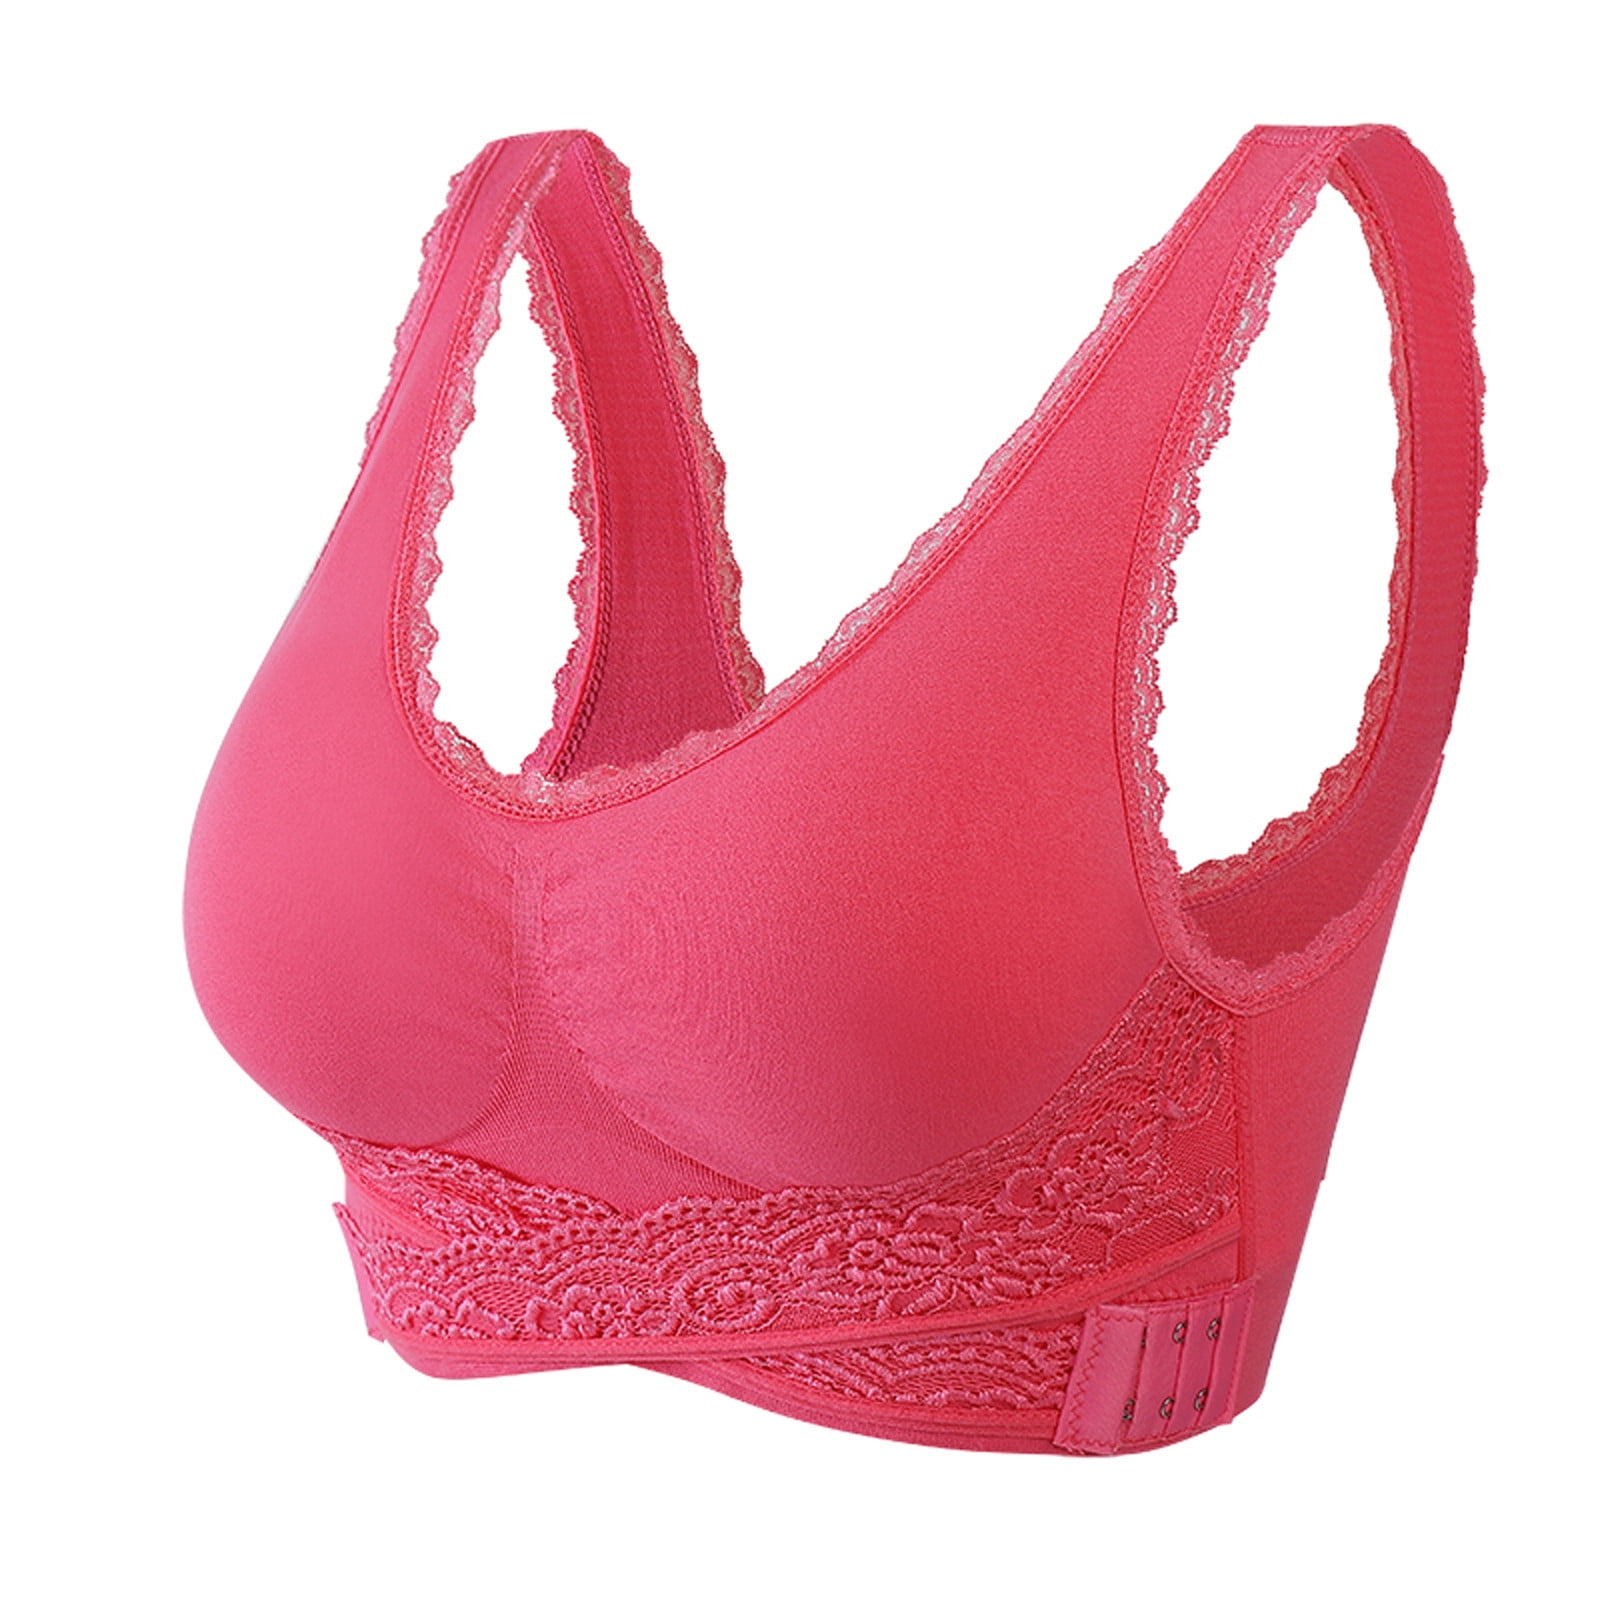 JNGSA Women's Minimizer Bras Comfort Cushion Strap Wirefree Full Coverage Large  Bust Bra Glossy Comfortable Breathable Bra Watermelon Red 